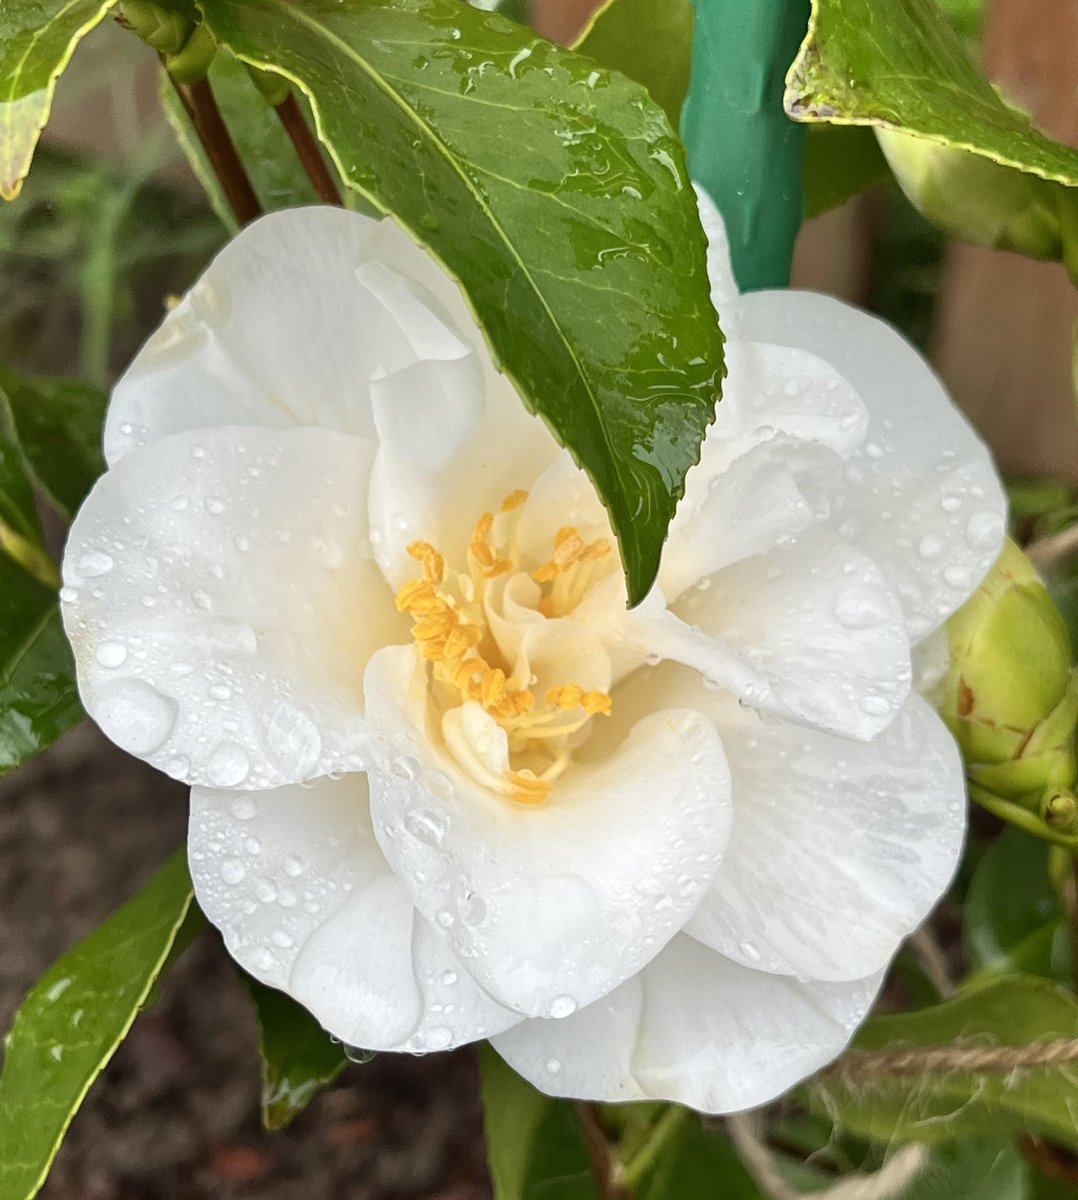 Good morning. My young camellia is doing great, I think. Hoping for lots of beautiful blooms in the future. The time will tell.  #MyGarden #FlowersonFriday